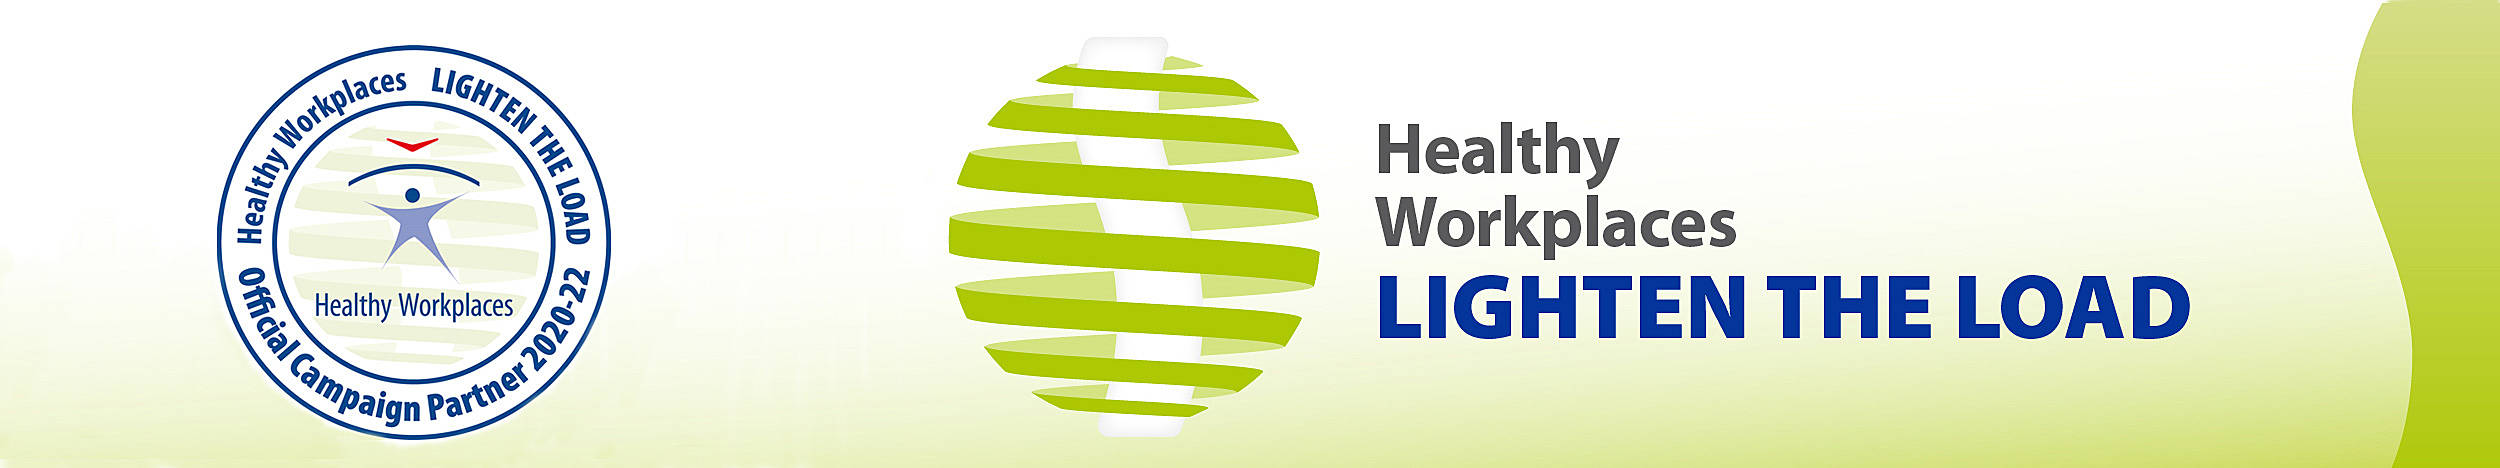 Healthy workplaces - Lighten the load banner